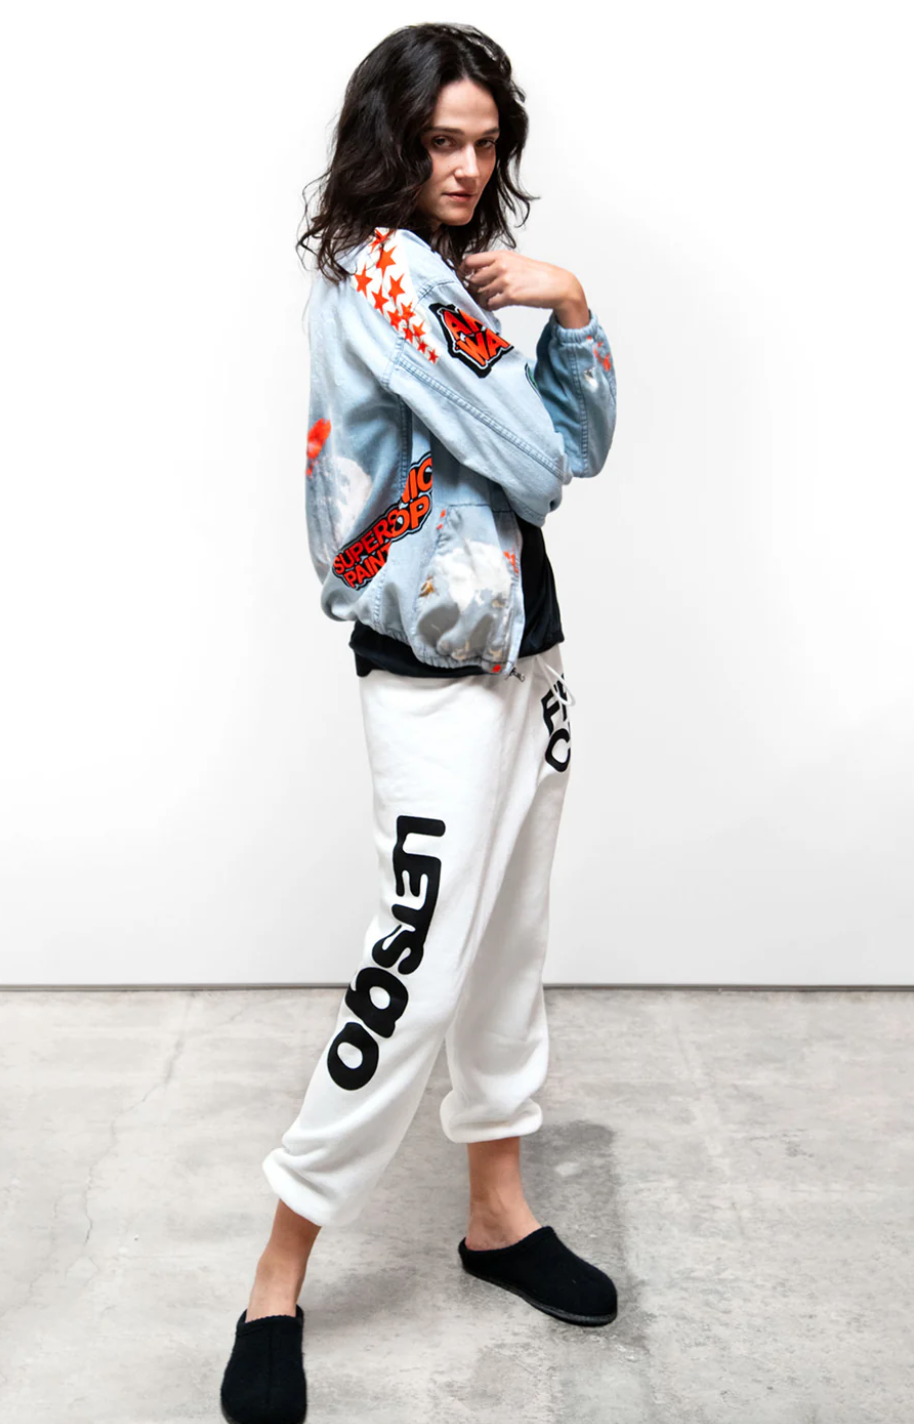 A woman stands confidently wearing a stylish white and red graphic jacket over a T-shirt, paired with the CIRCA'99 OG LETSGO OLDSCHOOL POLYBLEND/FLUFF sweat sweatpants marked "LET'S GO" in black letters, and black slip-on shoes, against a plain background.